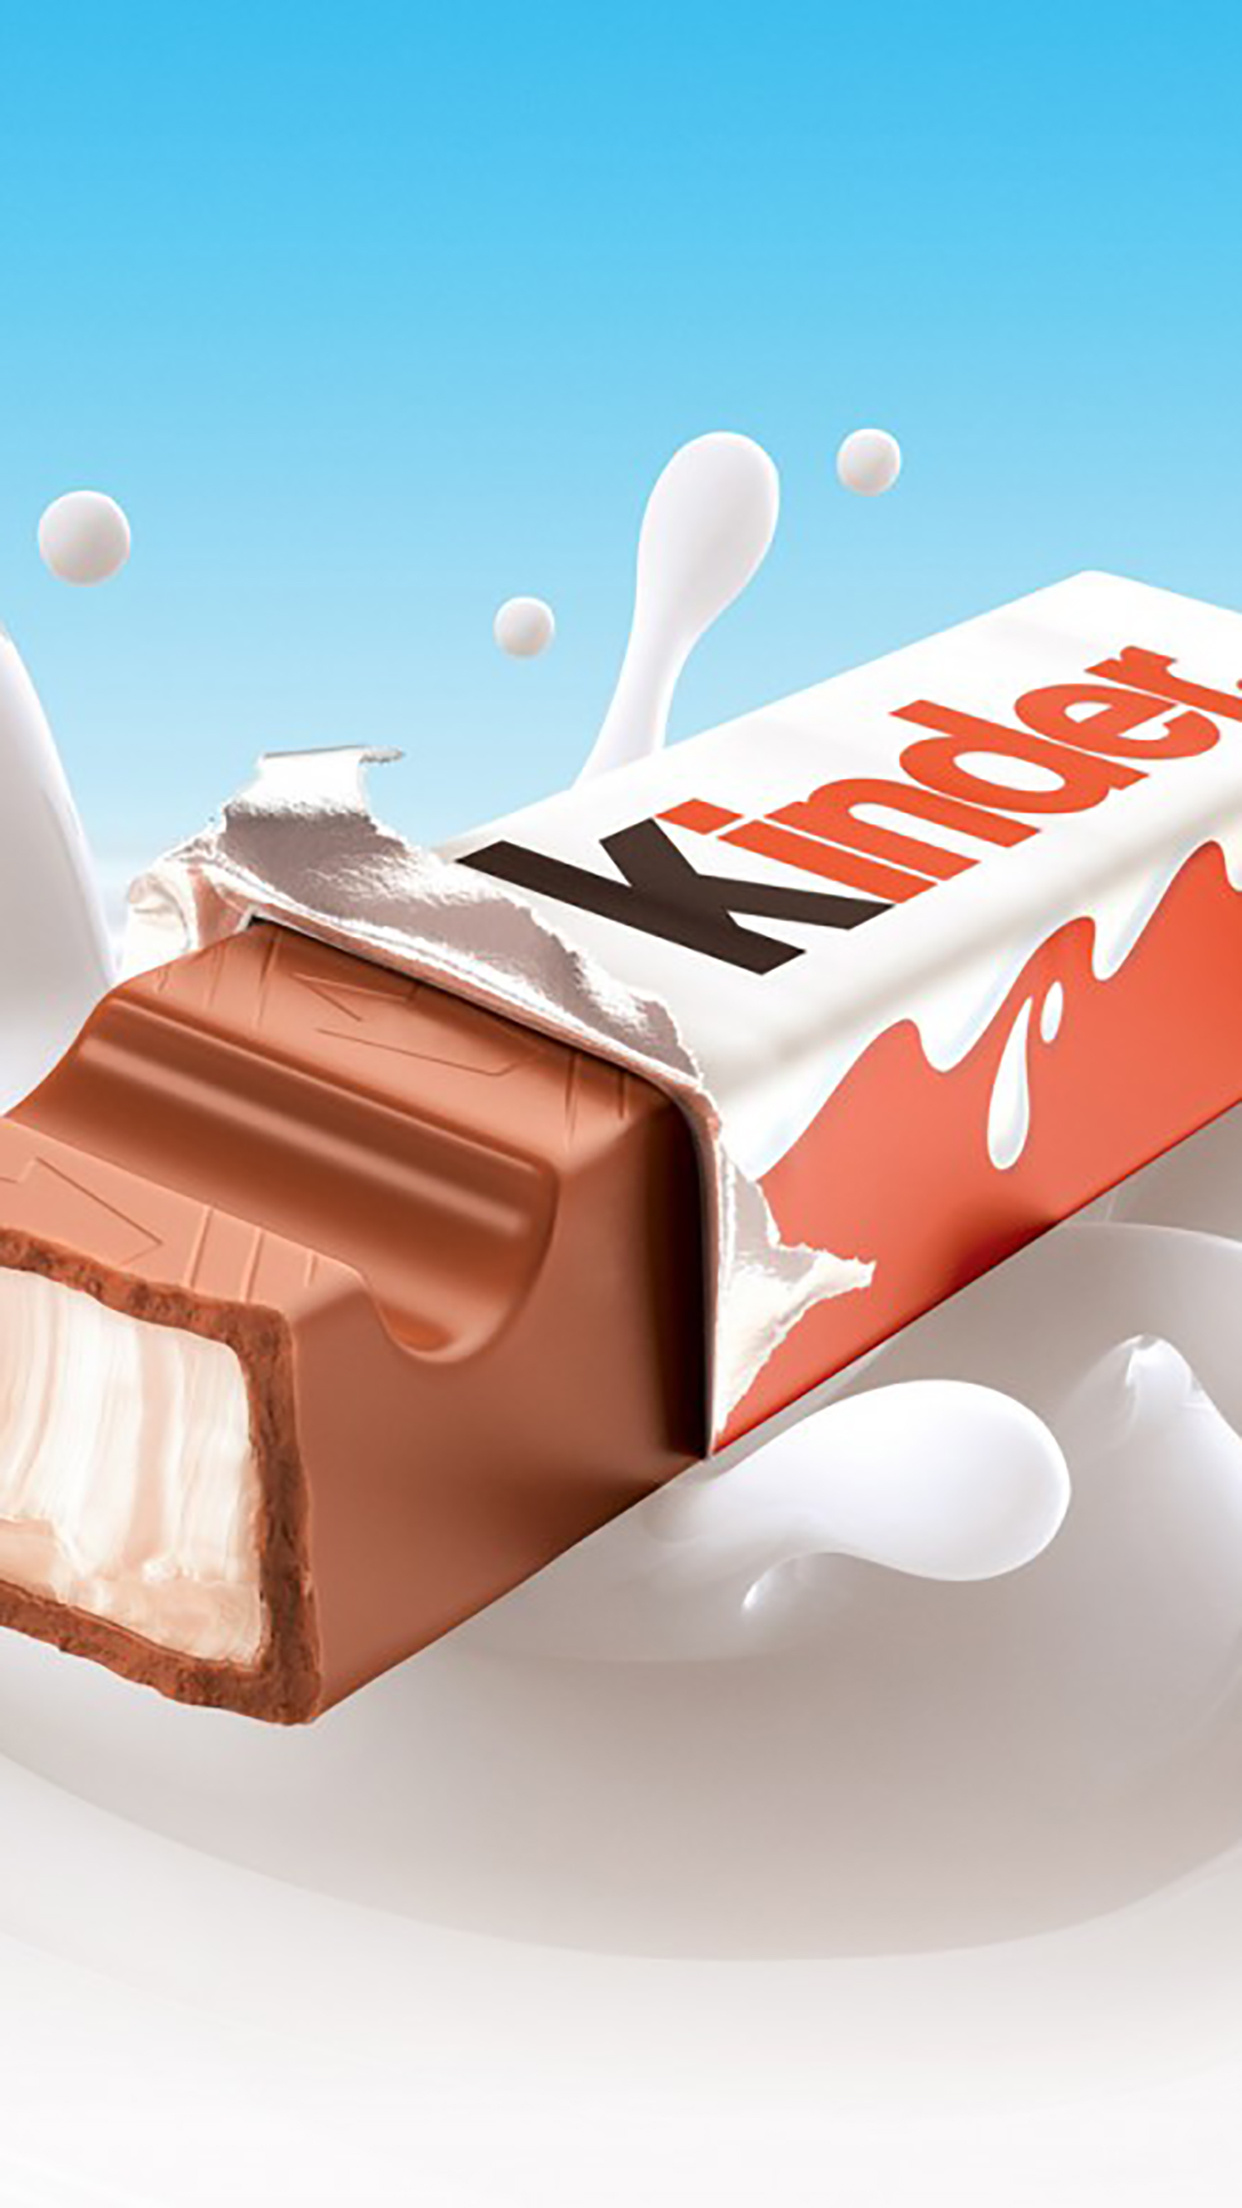 Kinder (Brand): A milk chocolate with a milky filling, Produced by Ferrero. 1250x2210 HD Background.